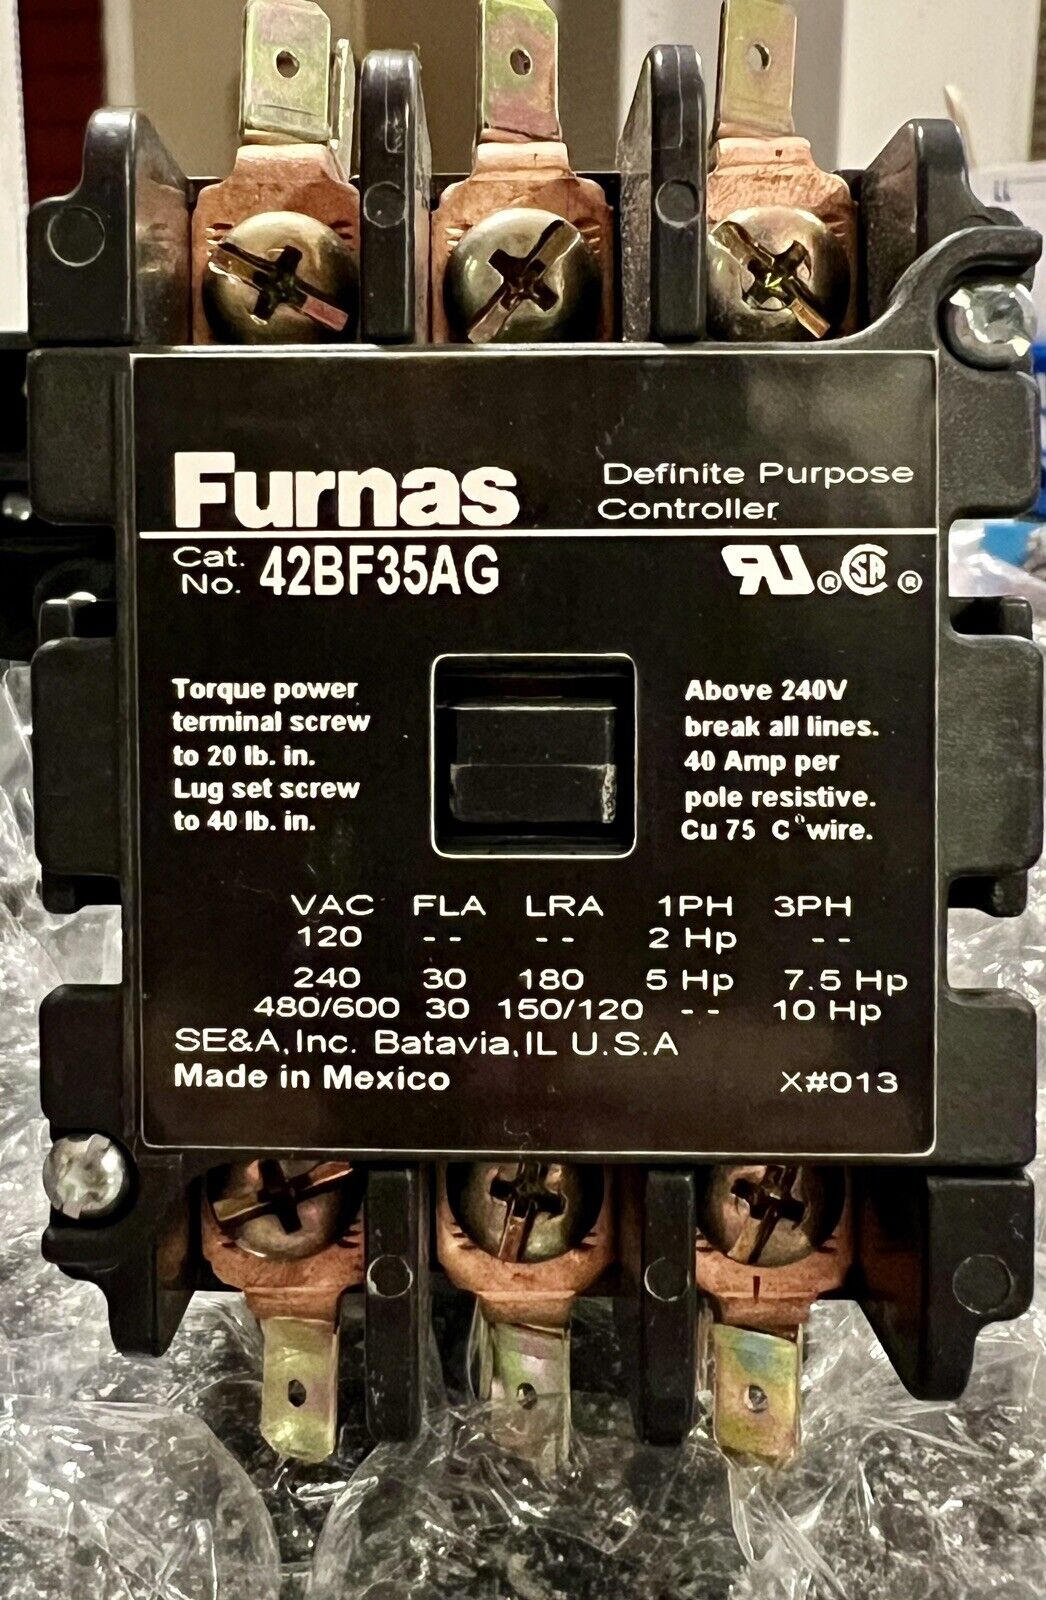 Furnas 42BF35AG Definite Purpose Controller Amp Rating FL 30 RES 40 3 POLE New